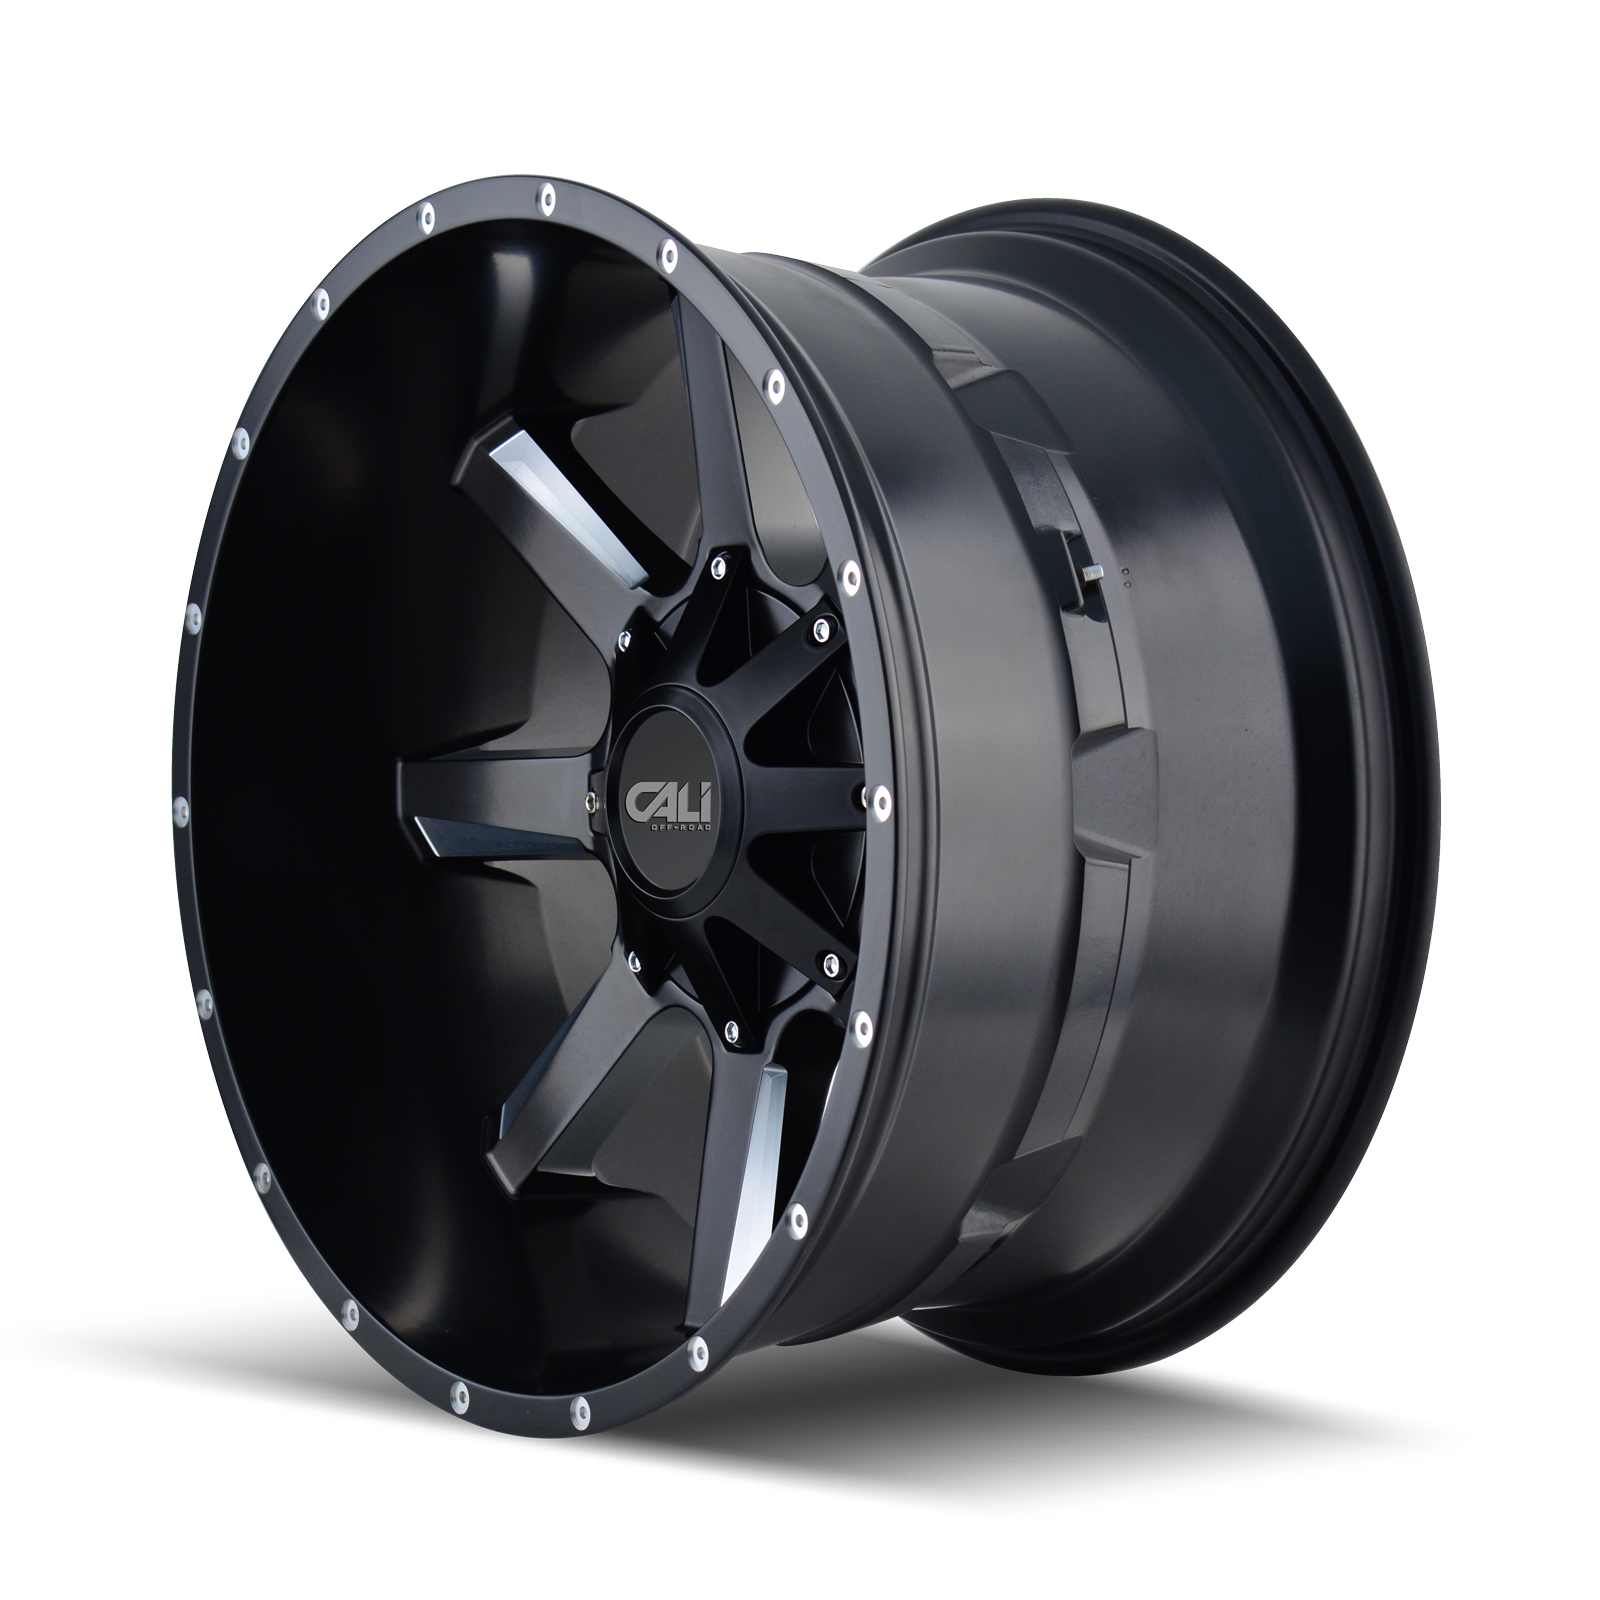 Cali Off-road BUSTED Satin black milled 20x9 0 5x139.7|5x150mm 110mm